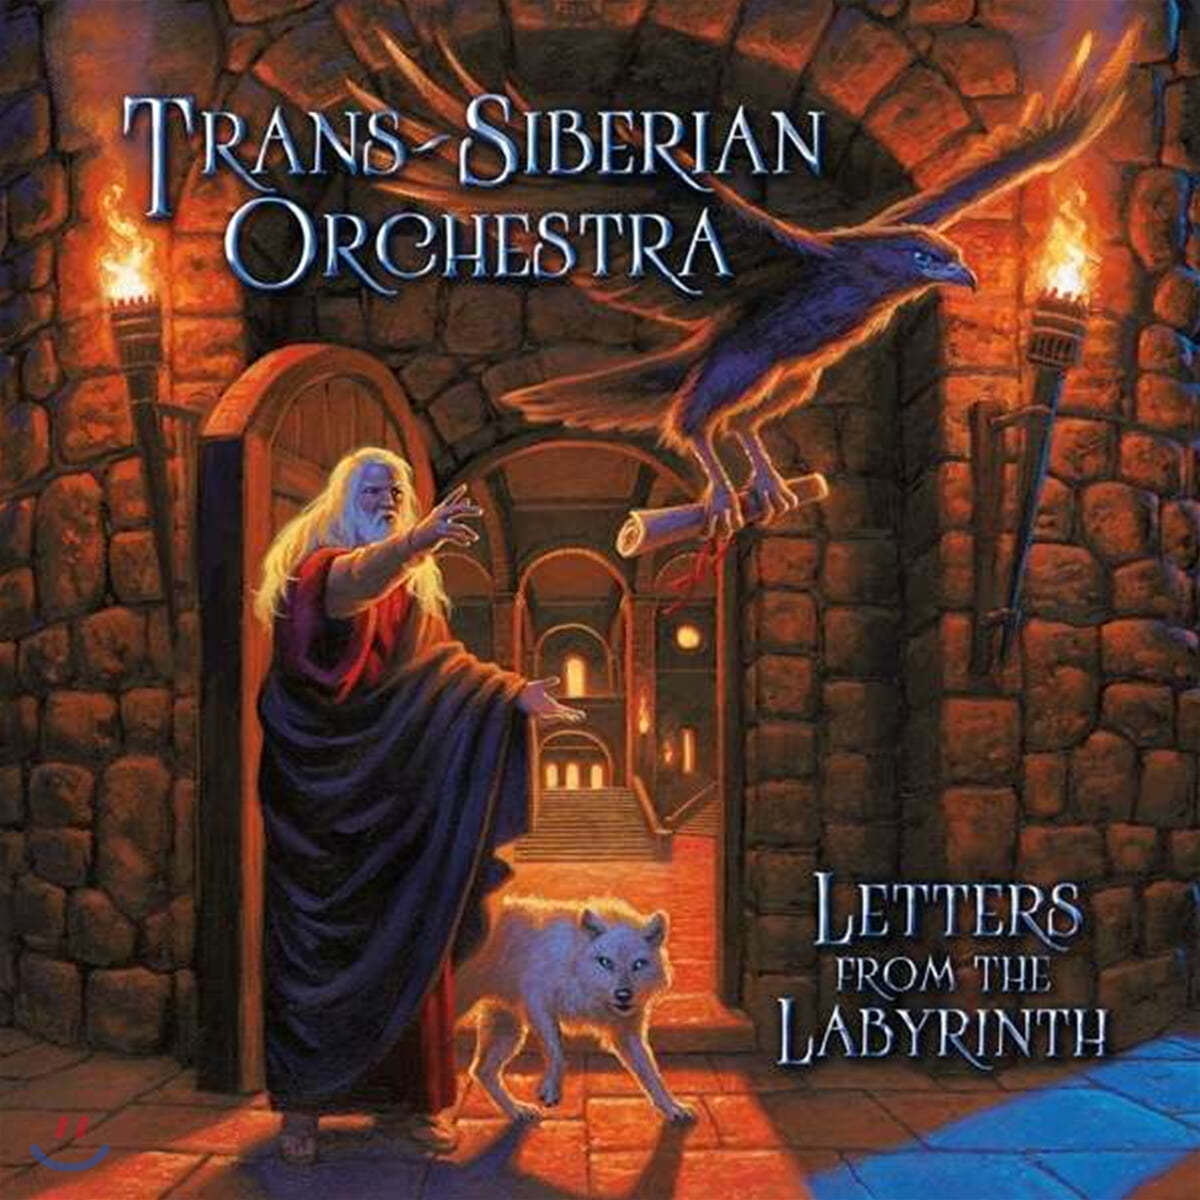 Trans-Siberian Orchestra (트랜스 시베리안 오케스트라) - Letters From The Labyrinth